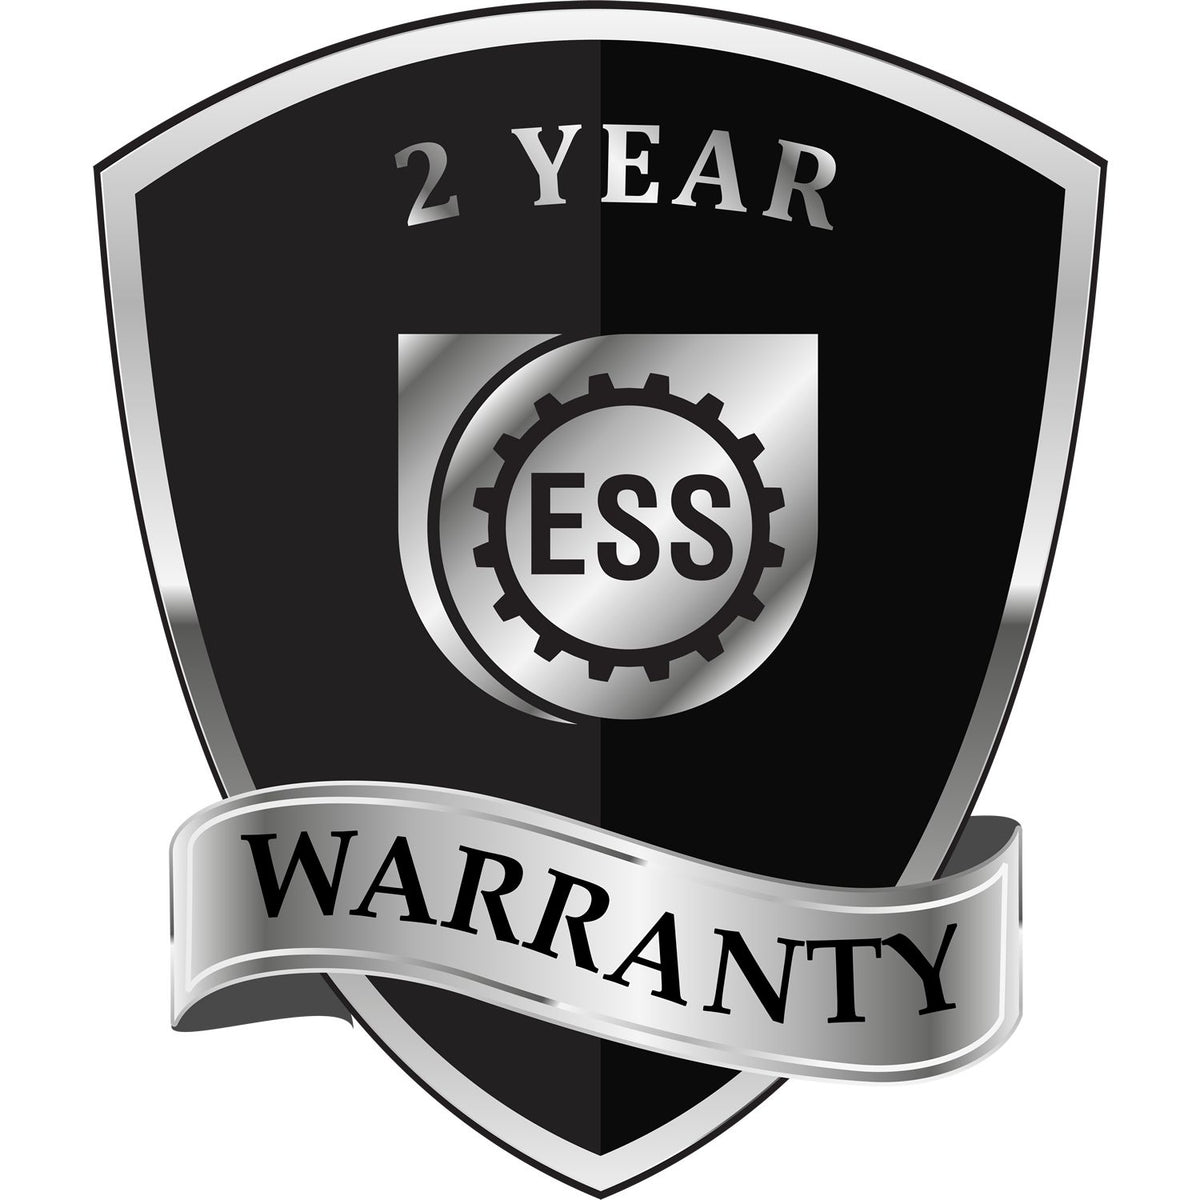 A badge or emblem showing a warranty icon for the Extended Long Reach Nevada Surveyor Embosser